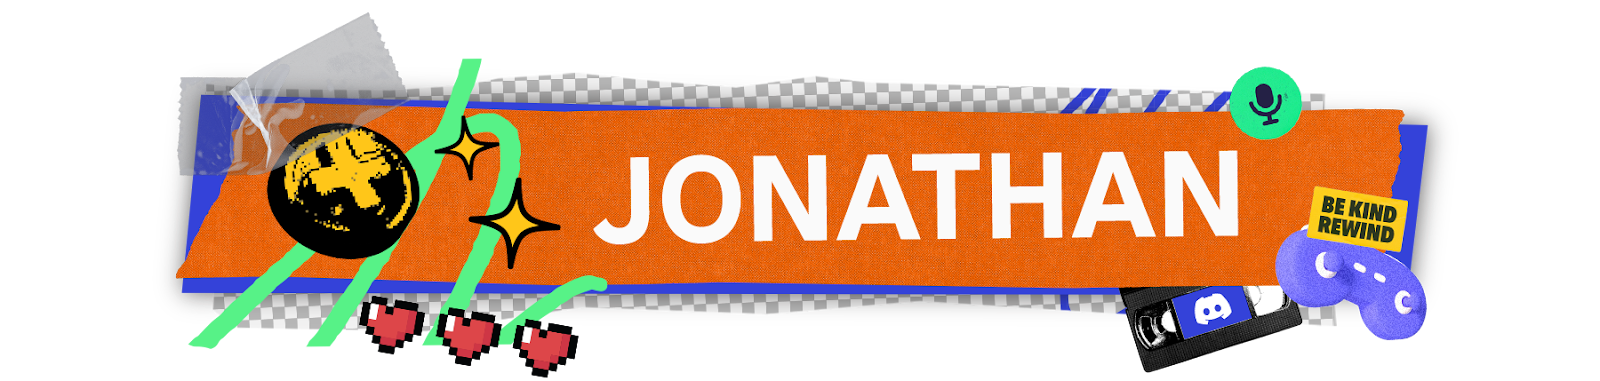 A stylized nameplate that says “Jonathan.”